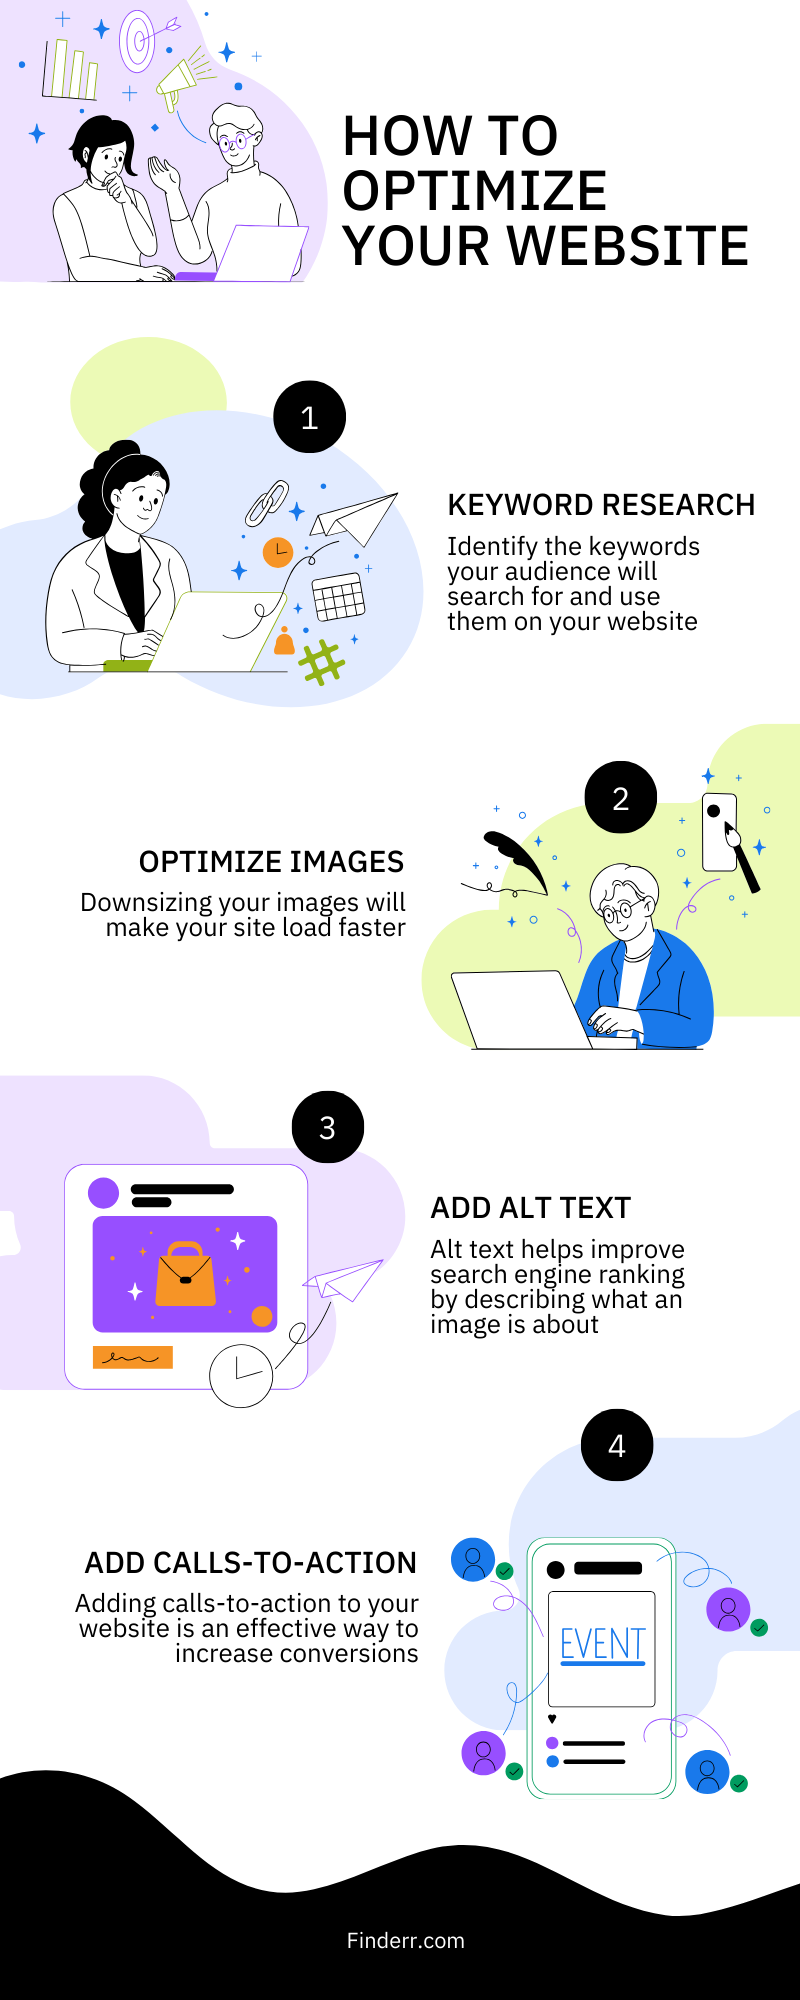 How to optimize your website in terms of SEO